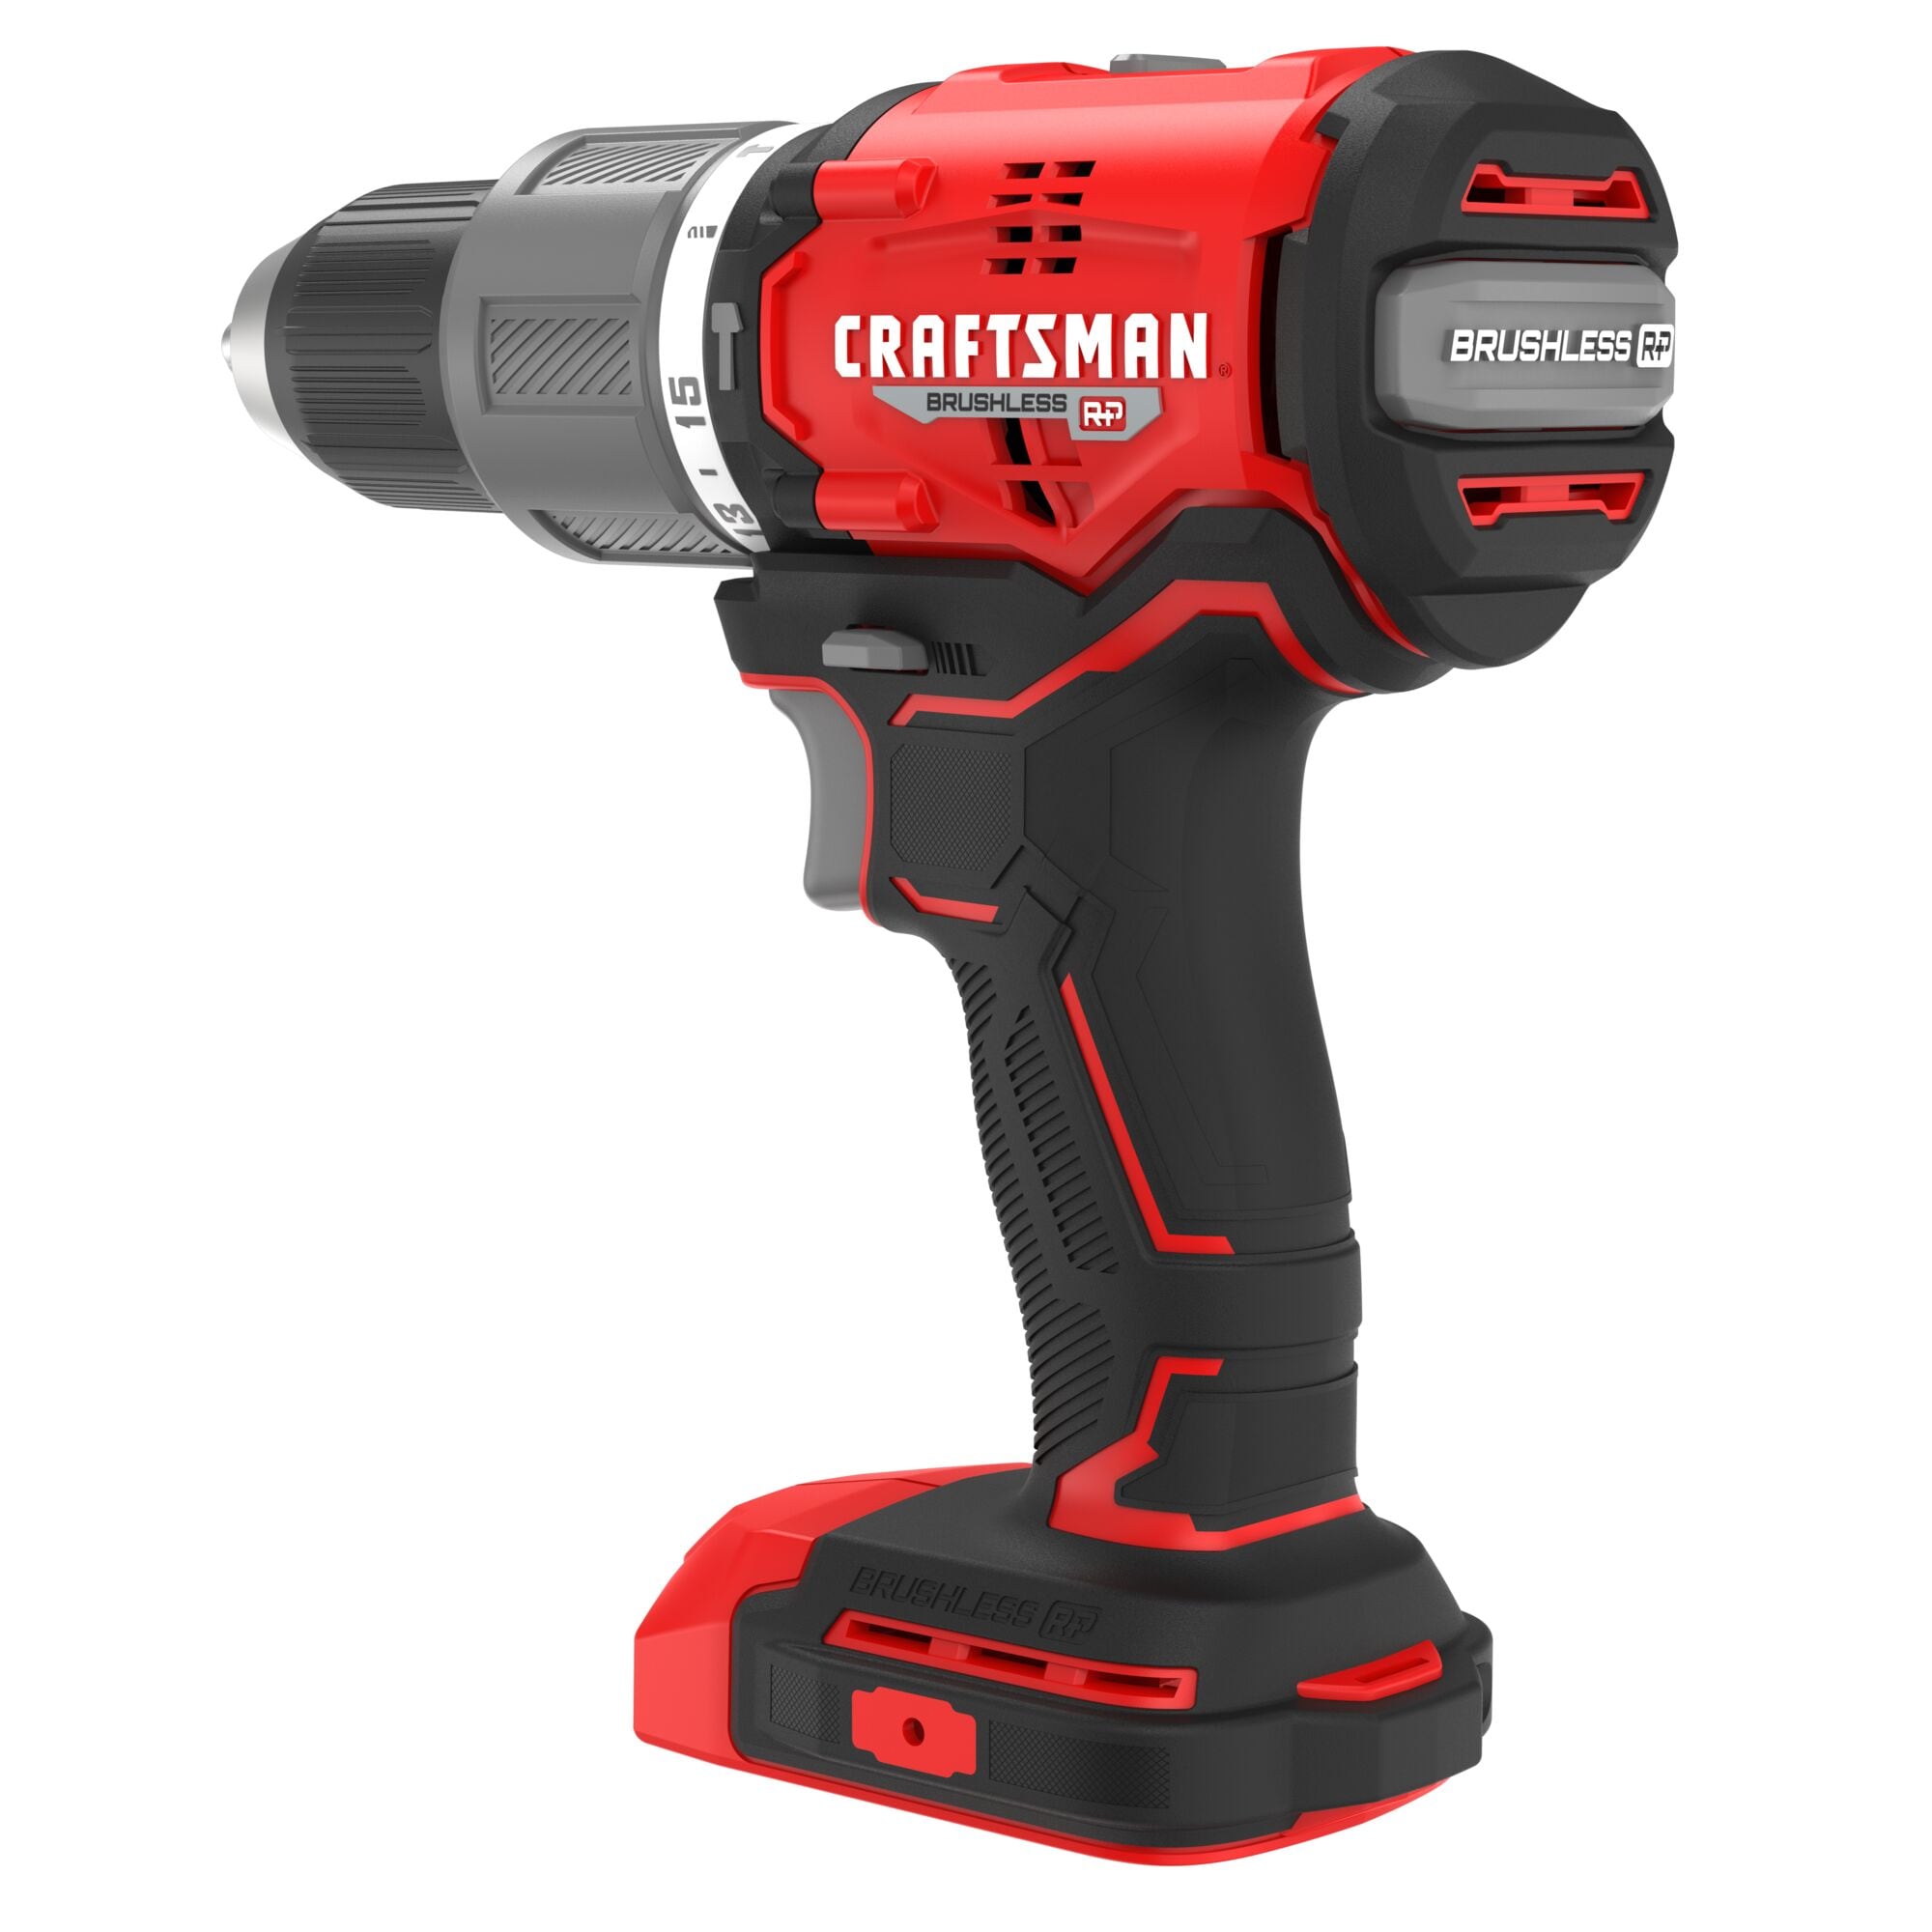 CRAFTSMAN V20 RP 1/2-in 20-volt Max-Amp Variable Speed Brushless Cordless  Hammer Drill(Bare Tool) in the Hammer Drills department at